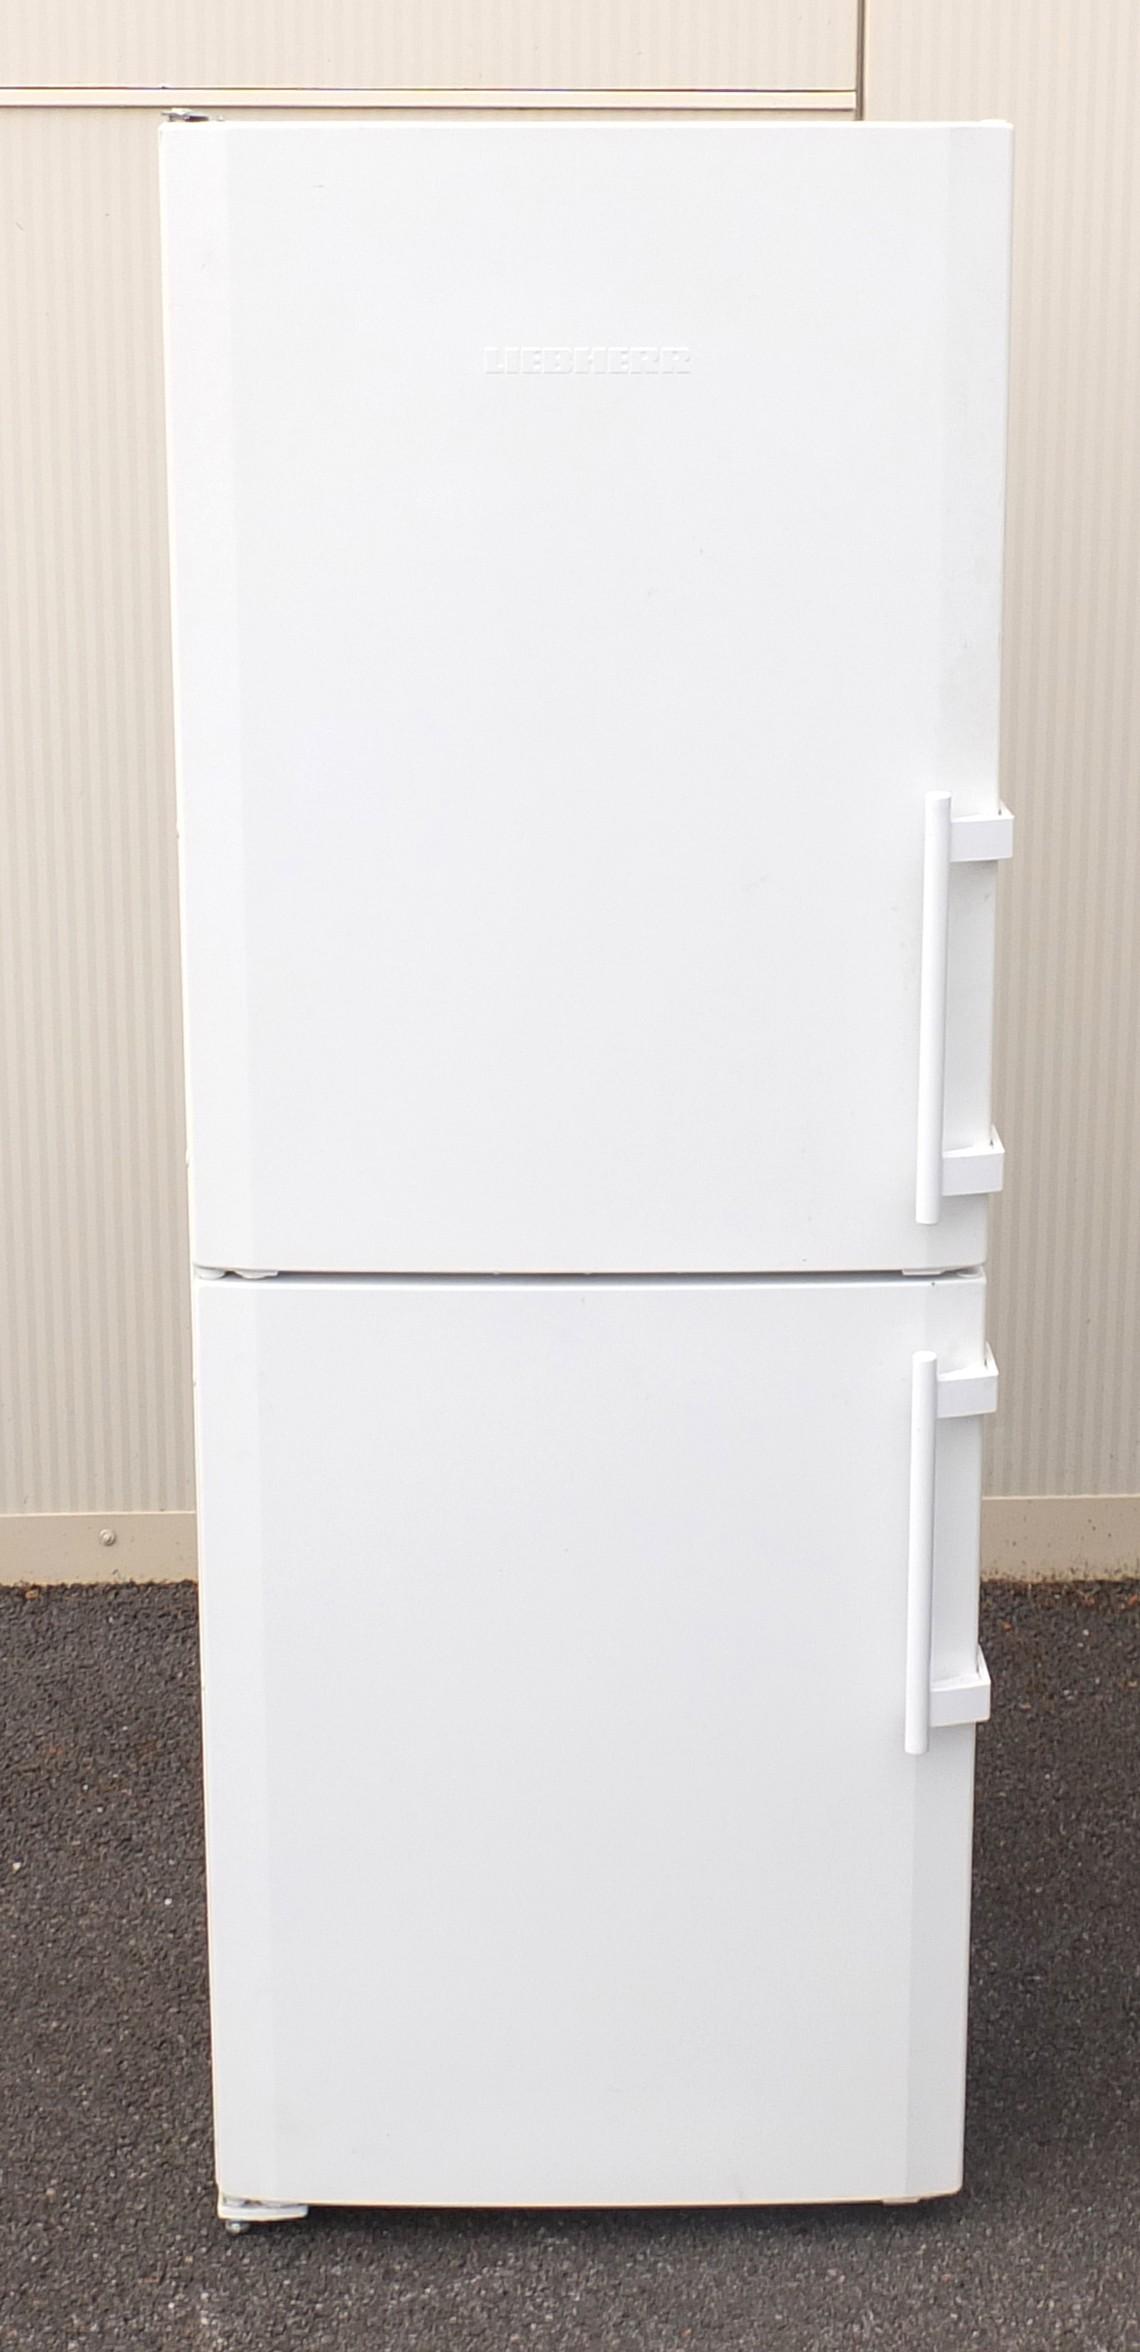 Liebherr Comfort no frost fridge freezer, 162cm high : For Further Condition Reports Please Visit - Image 2 of 4